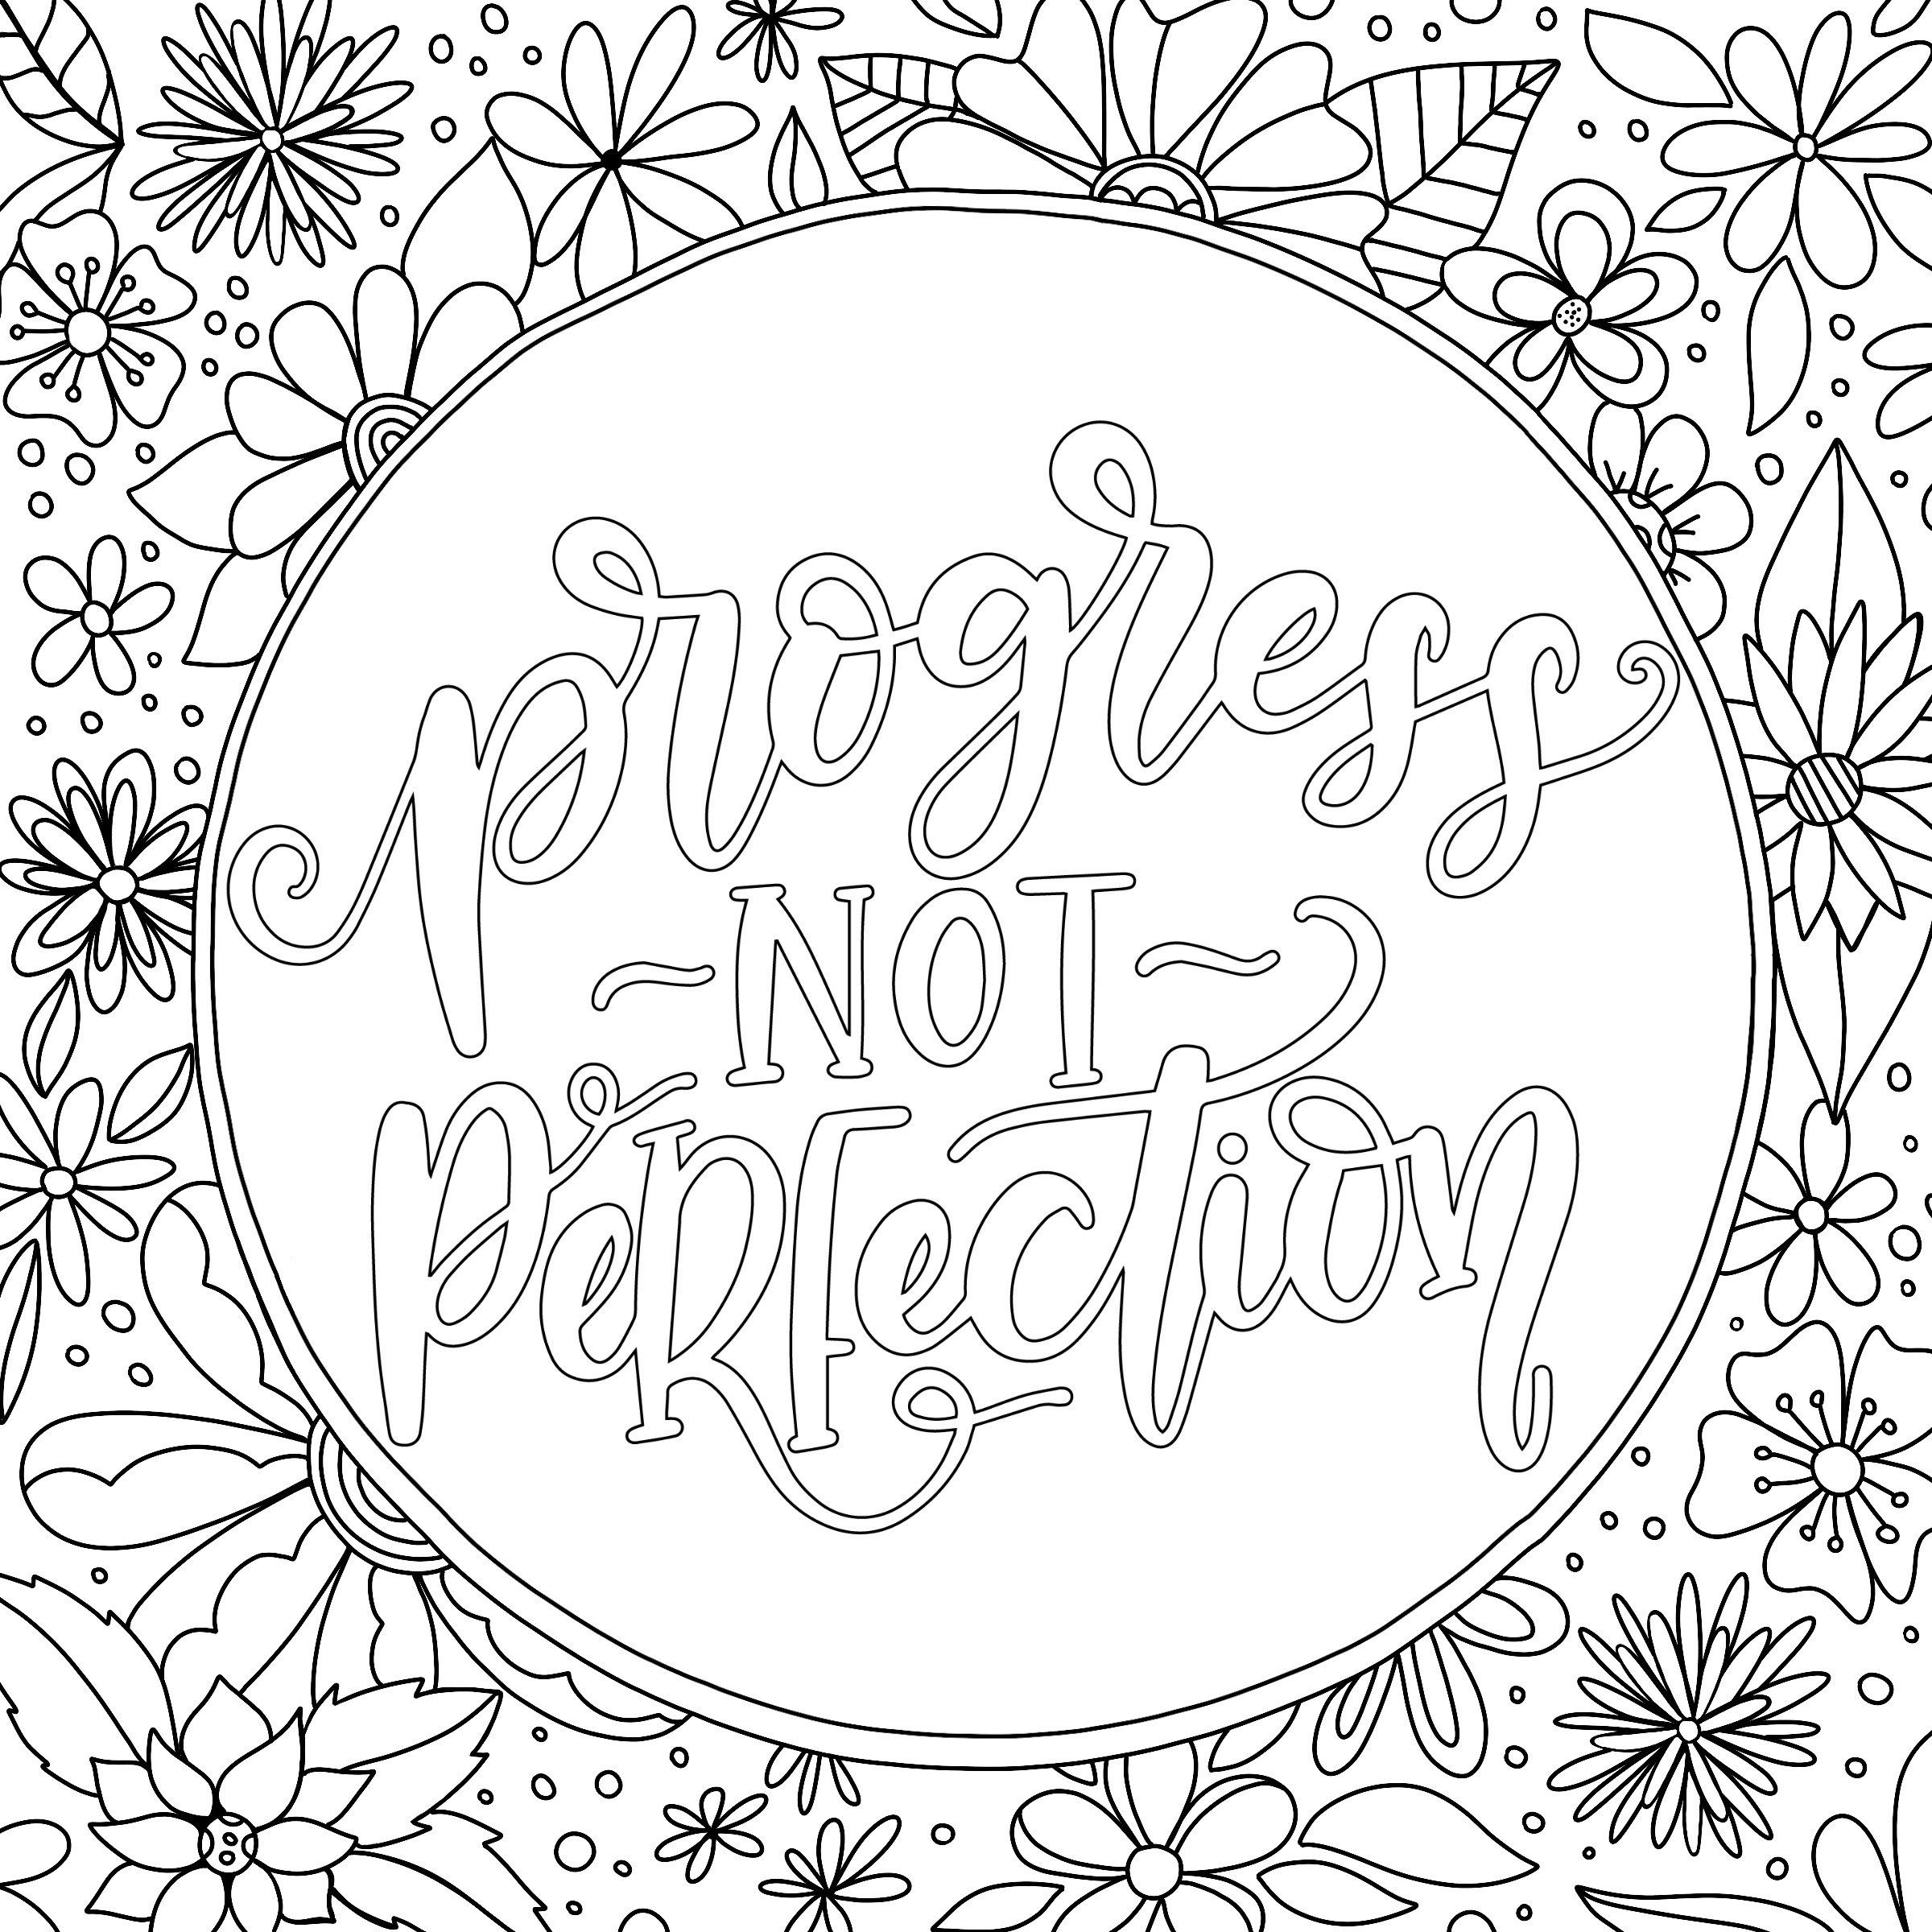 3 Motivational Printable Coloring Pages Zentangle Coloring ...